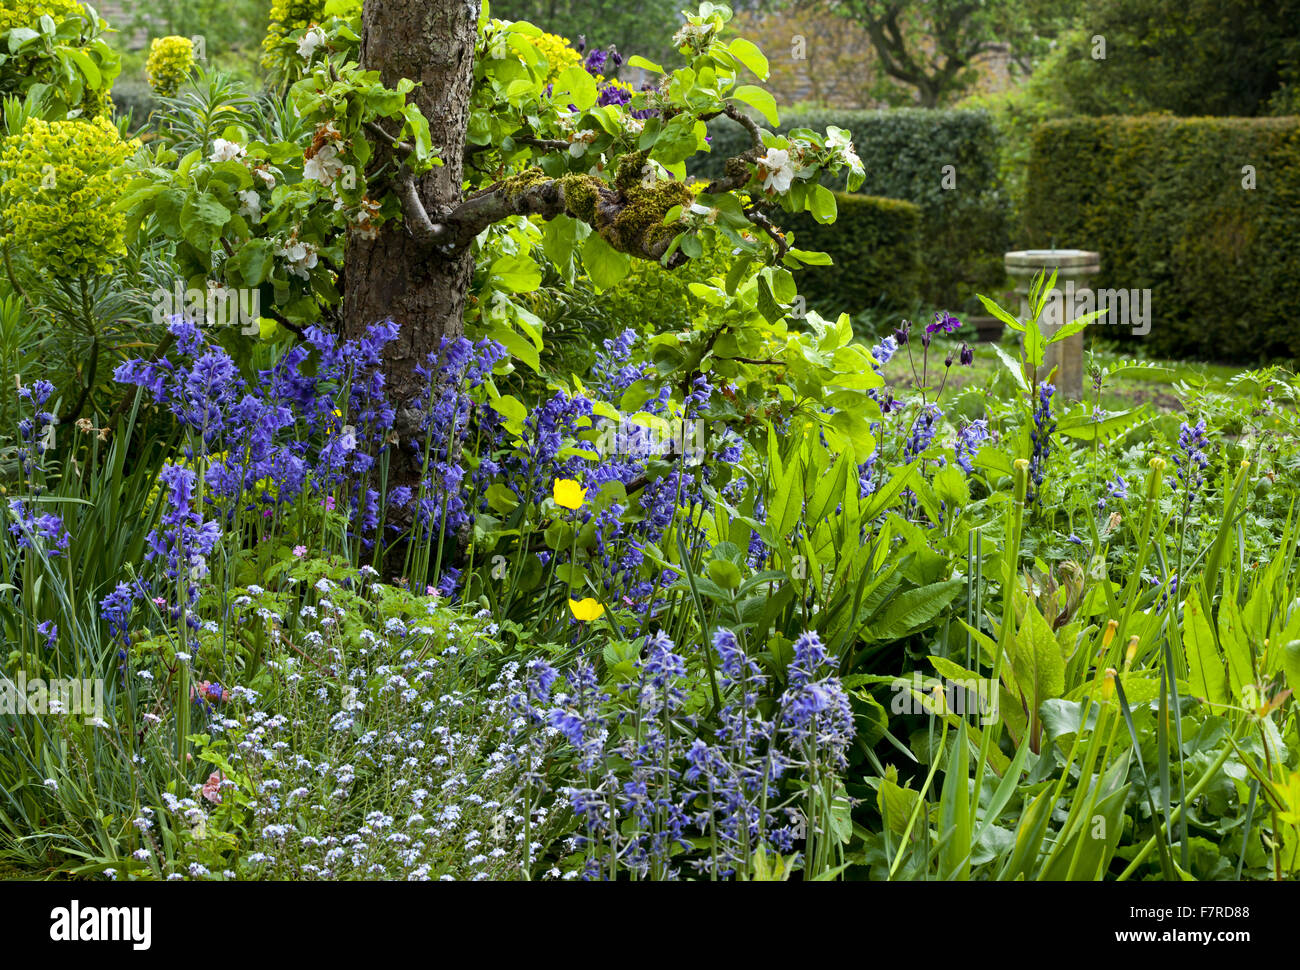 The garden in the spring at Eyam Hall and Craft Centre, Derbyshire. Eyam Hall is an unspoilt example of a gritstone Jacobean manor house, set within a walled garden. Stock Photo